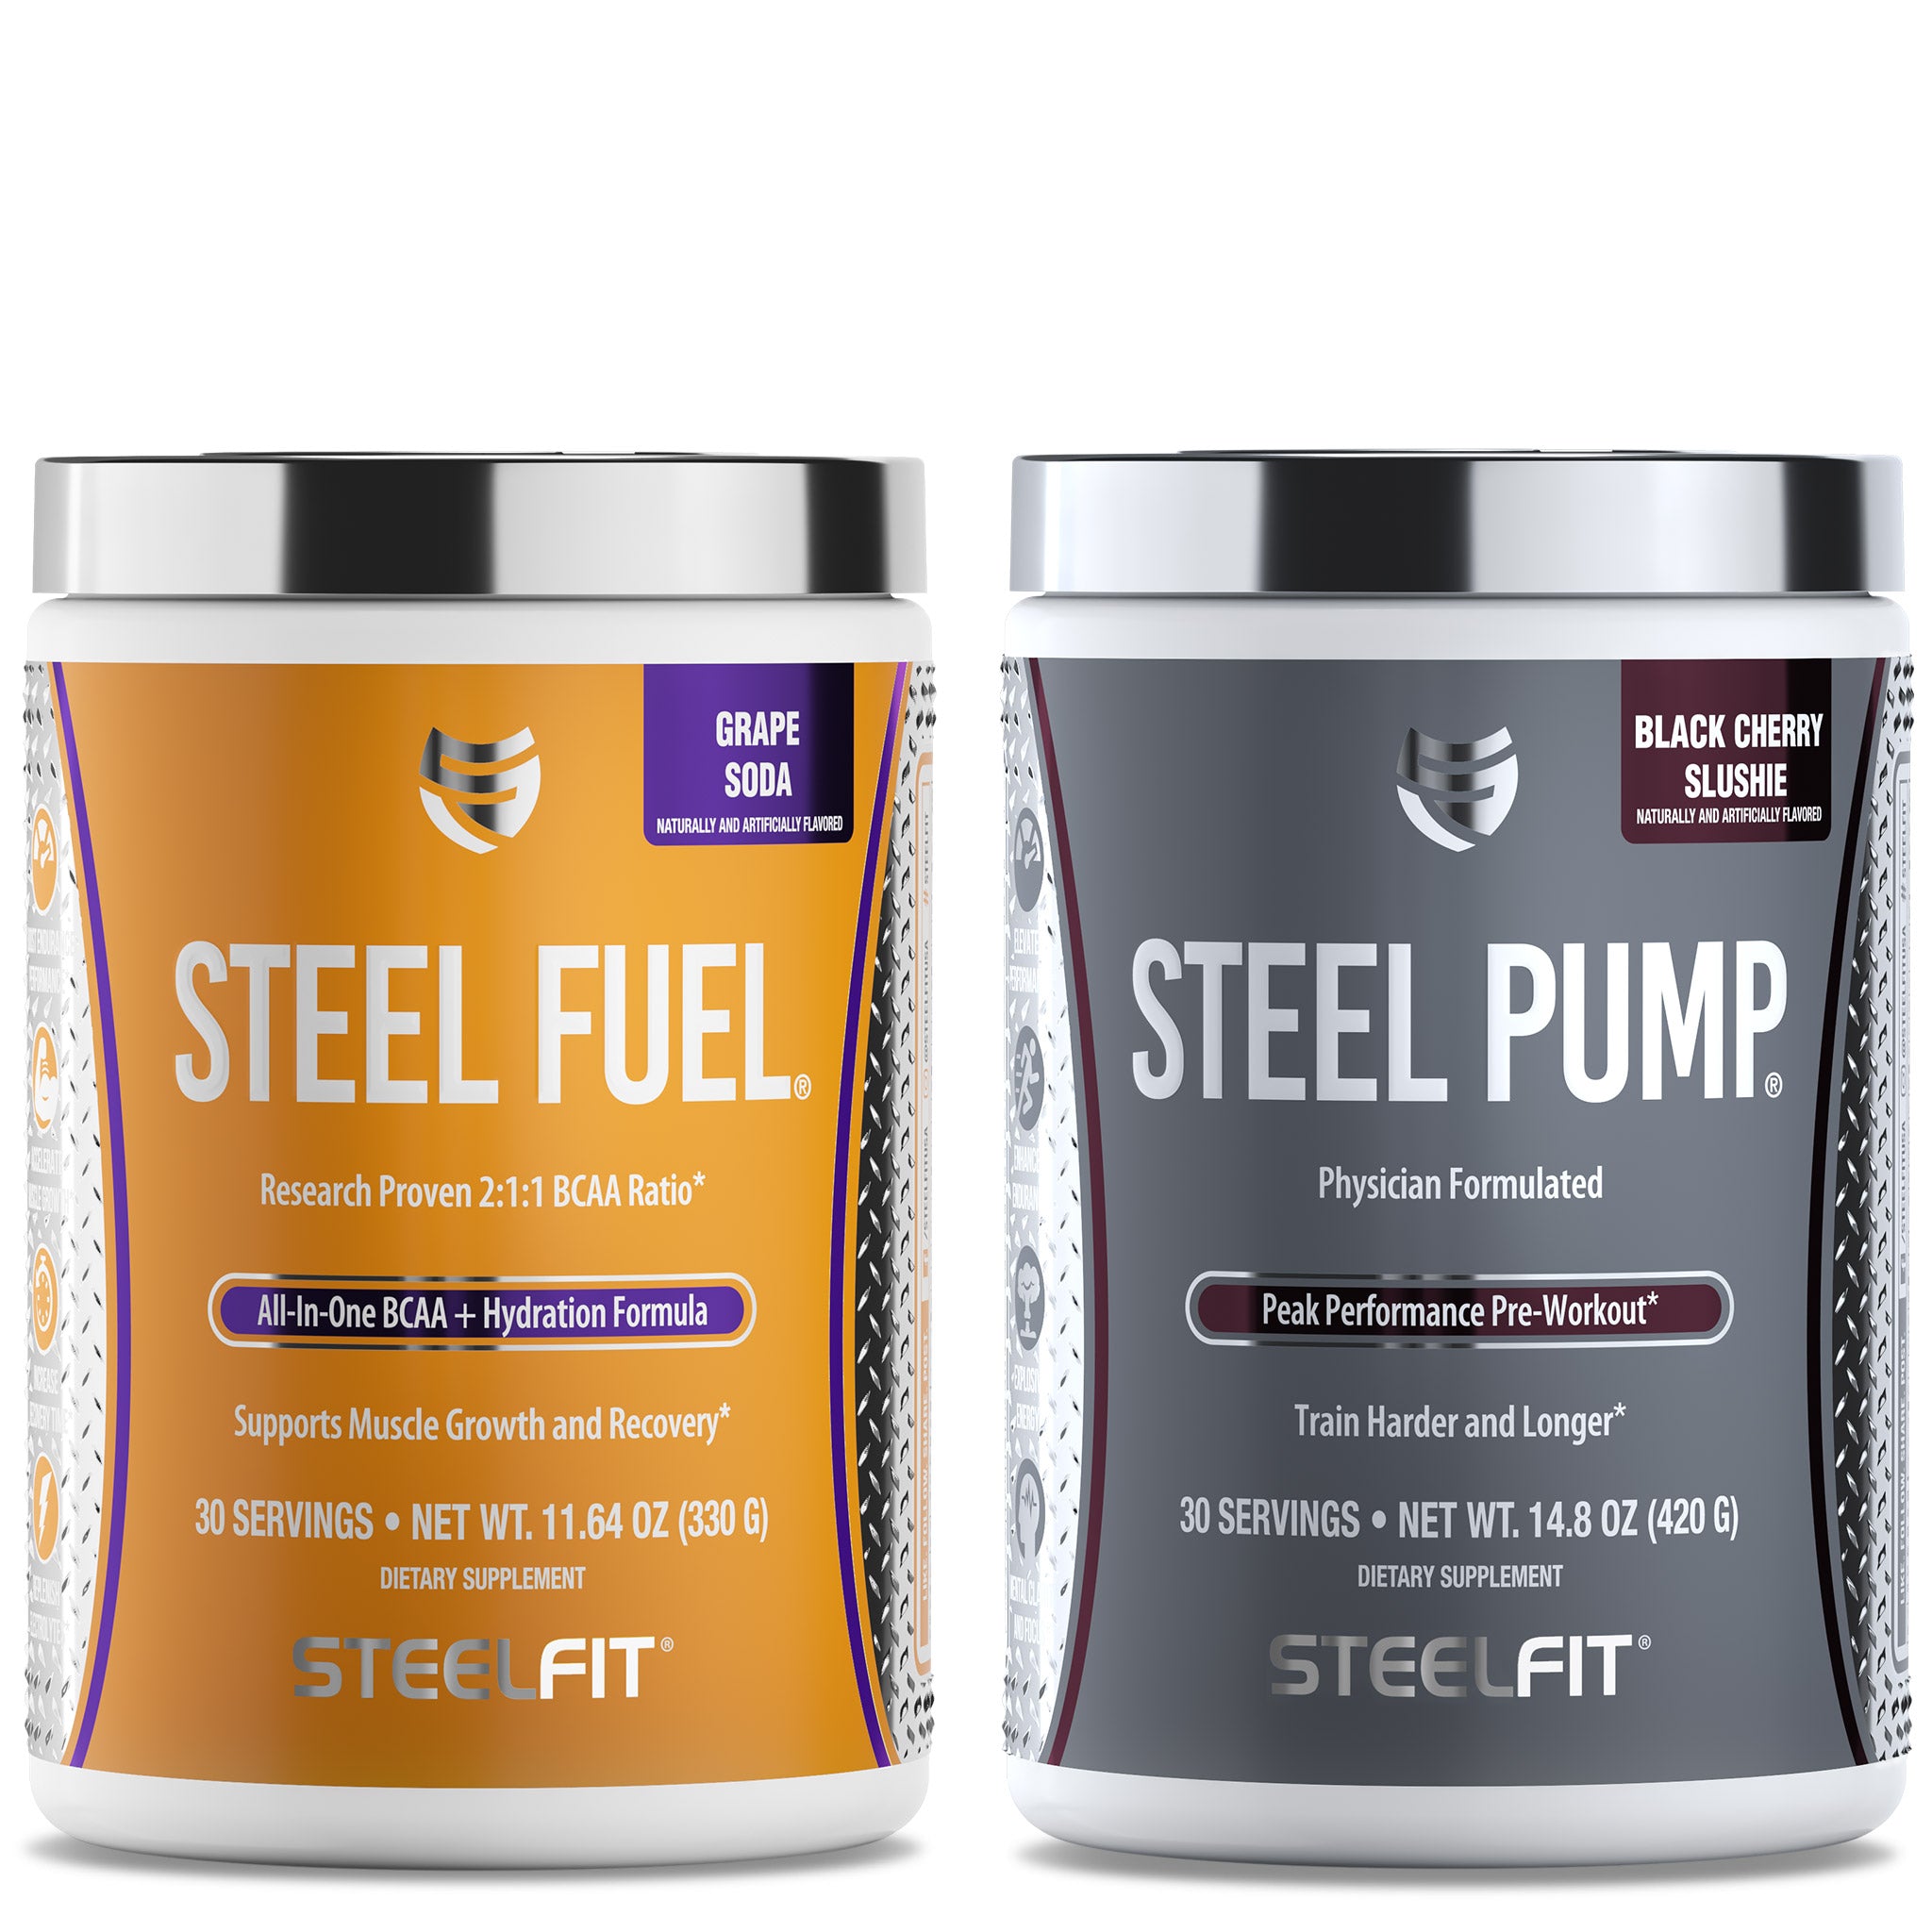 15 Minute Pre Workout Stack Supplements for Burn Fat fast